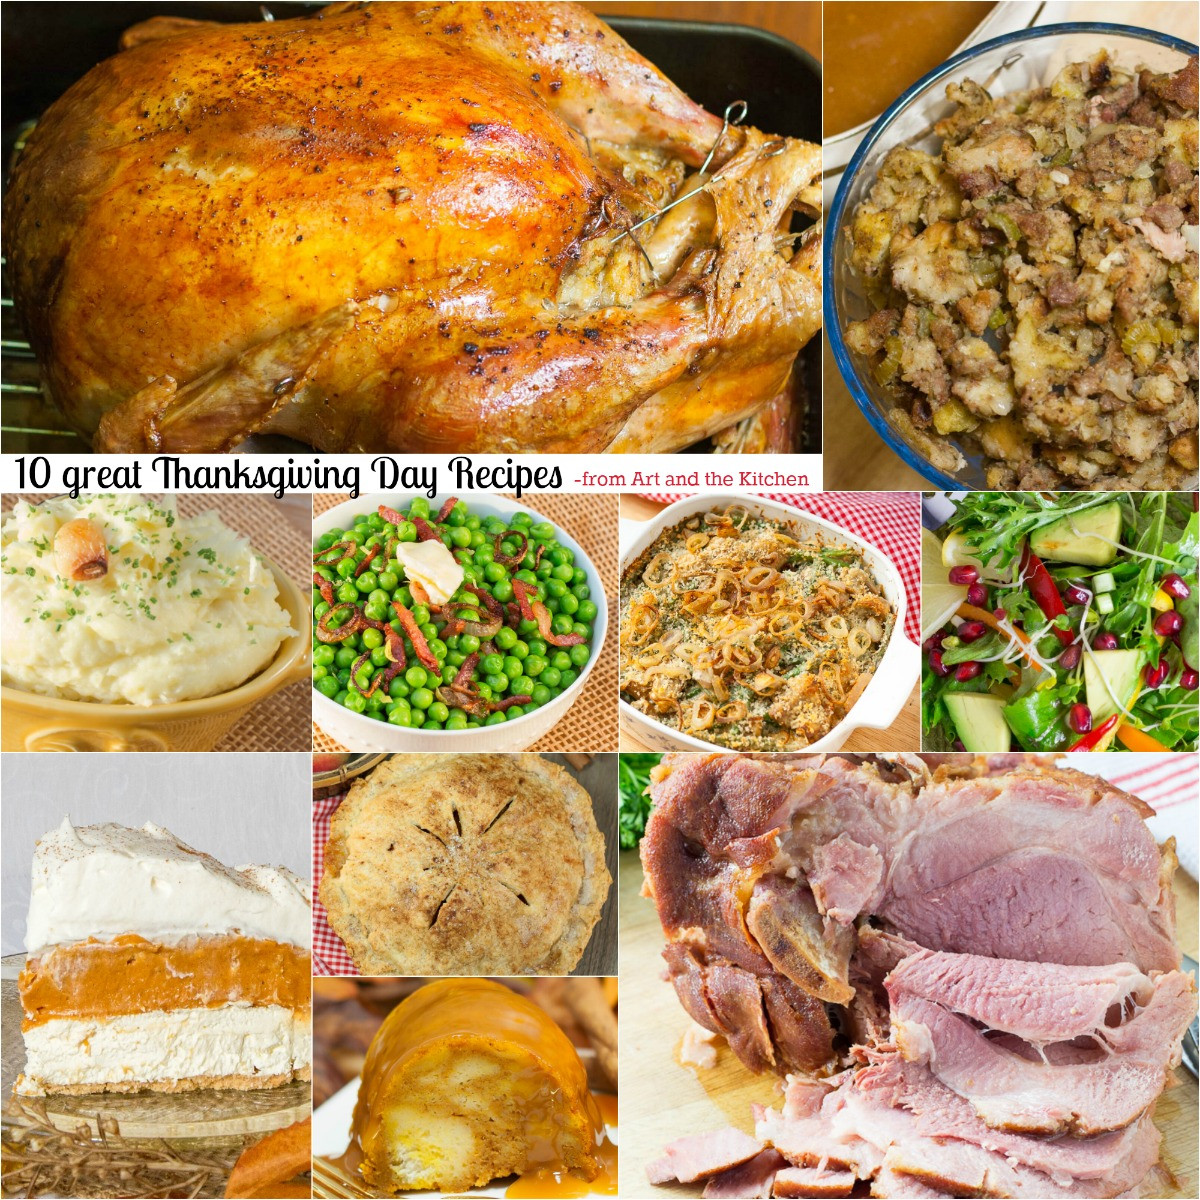 The Kitchen Thanksgiving Recipes
 10 Great Thanksgiving Day Recipes